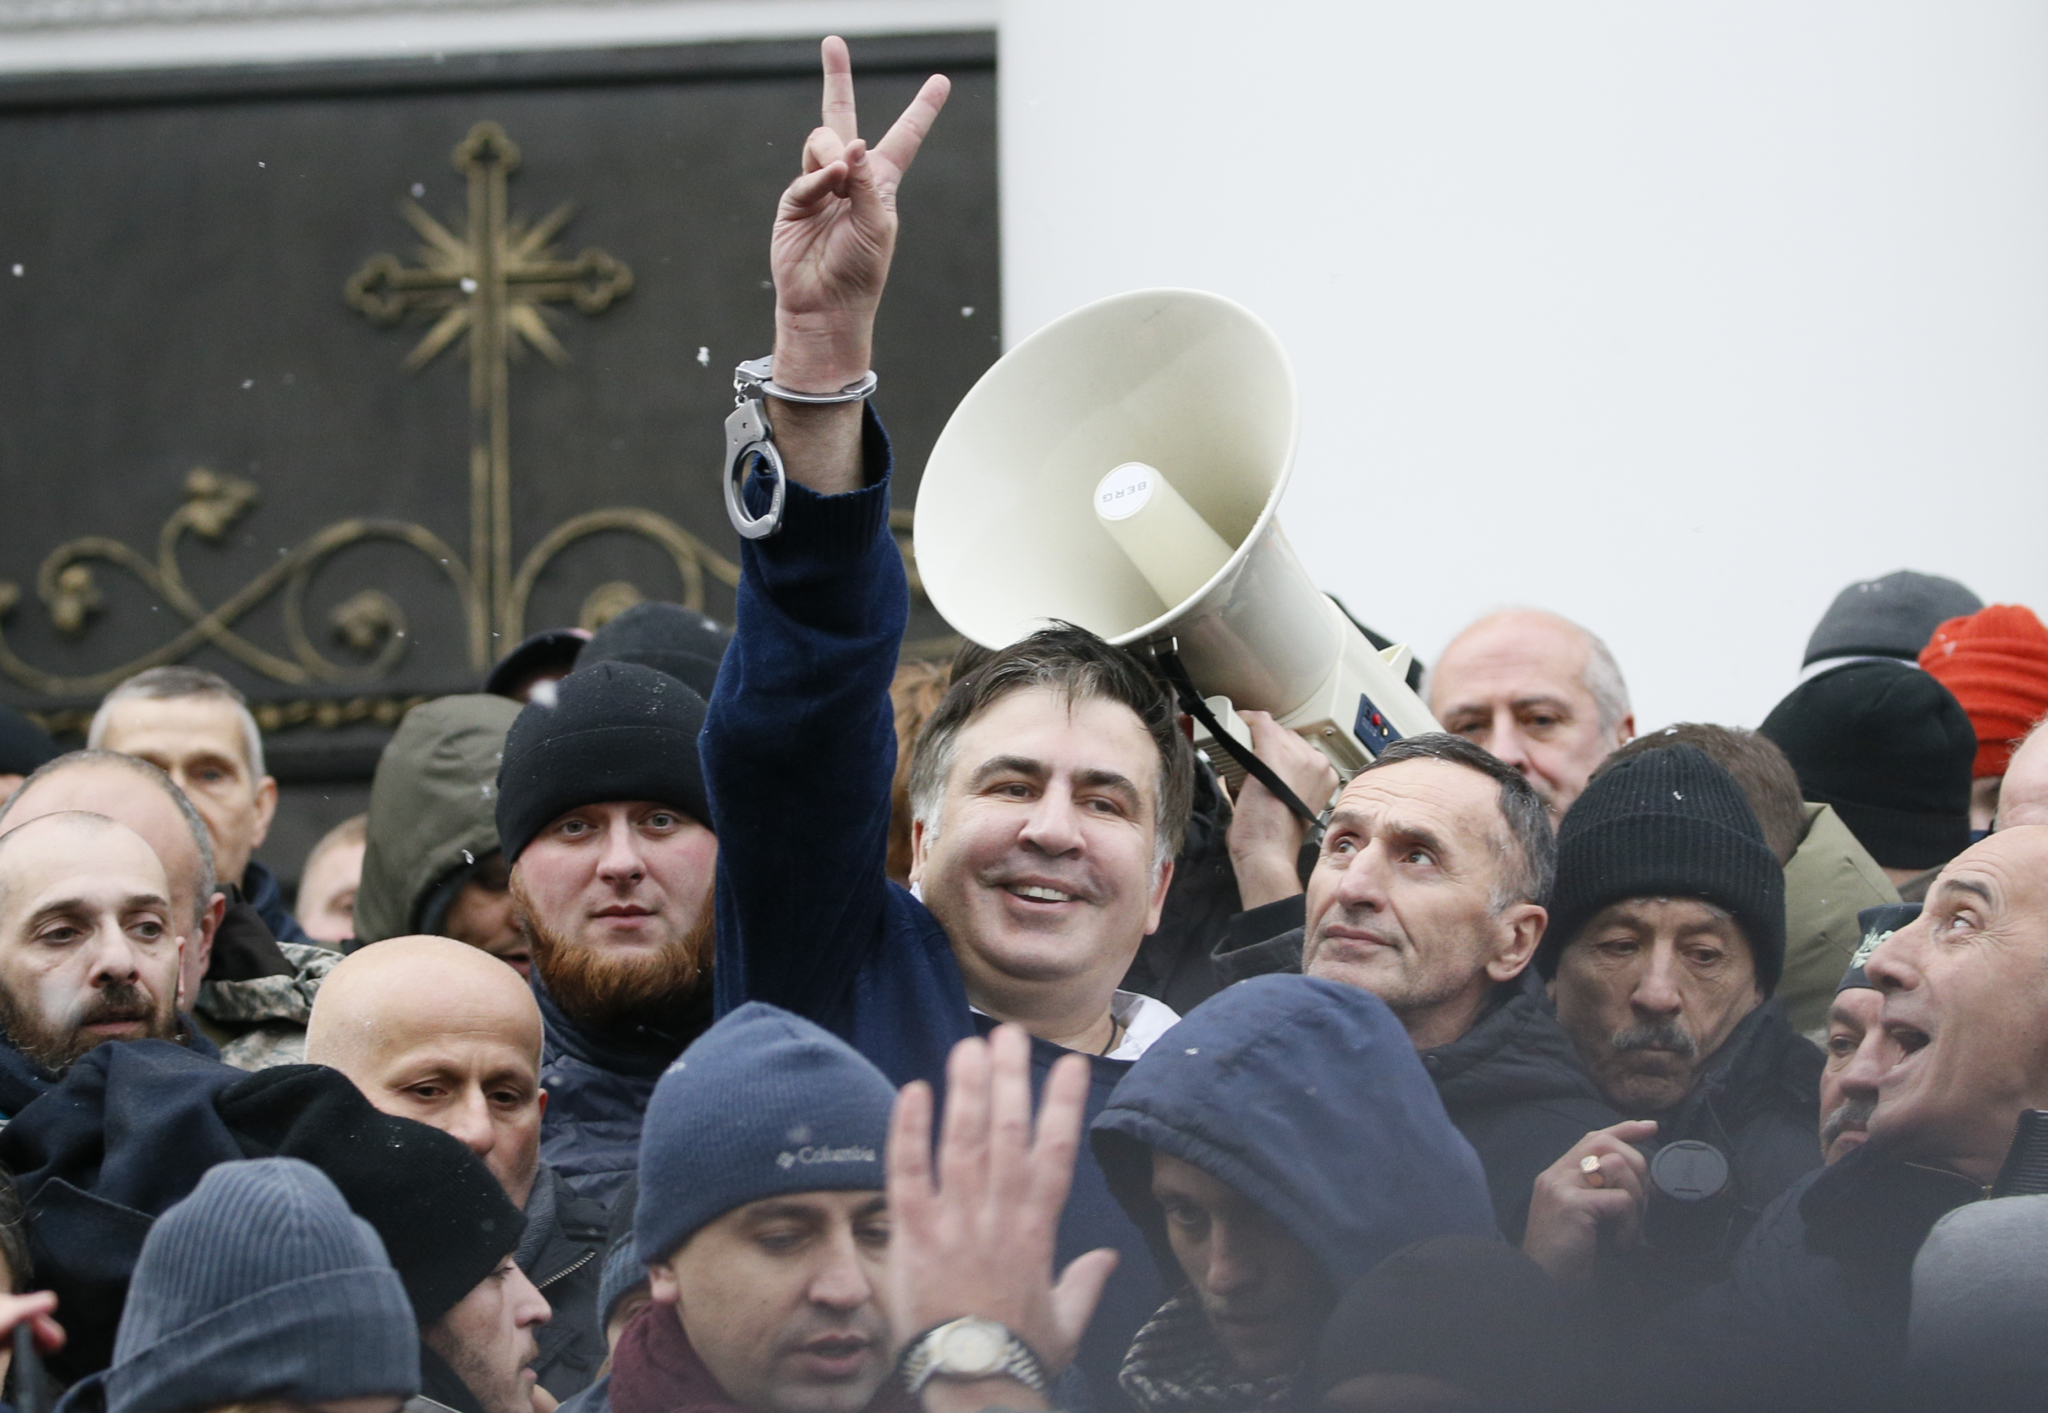 Georgian former President Mikheil Saakashvili flashes a victory sign after he was freed by his supporters in Kiev